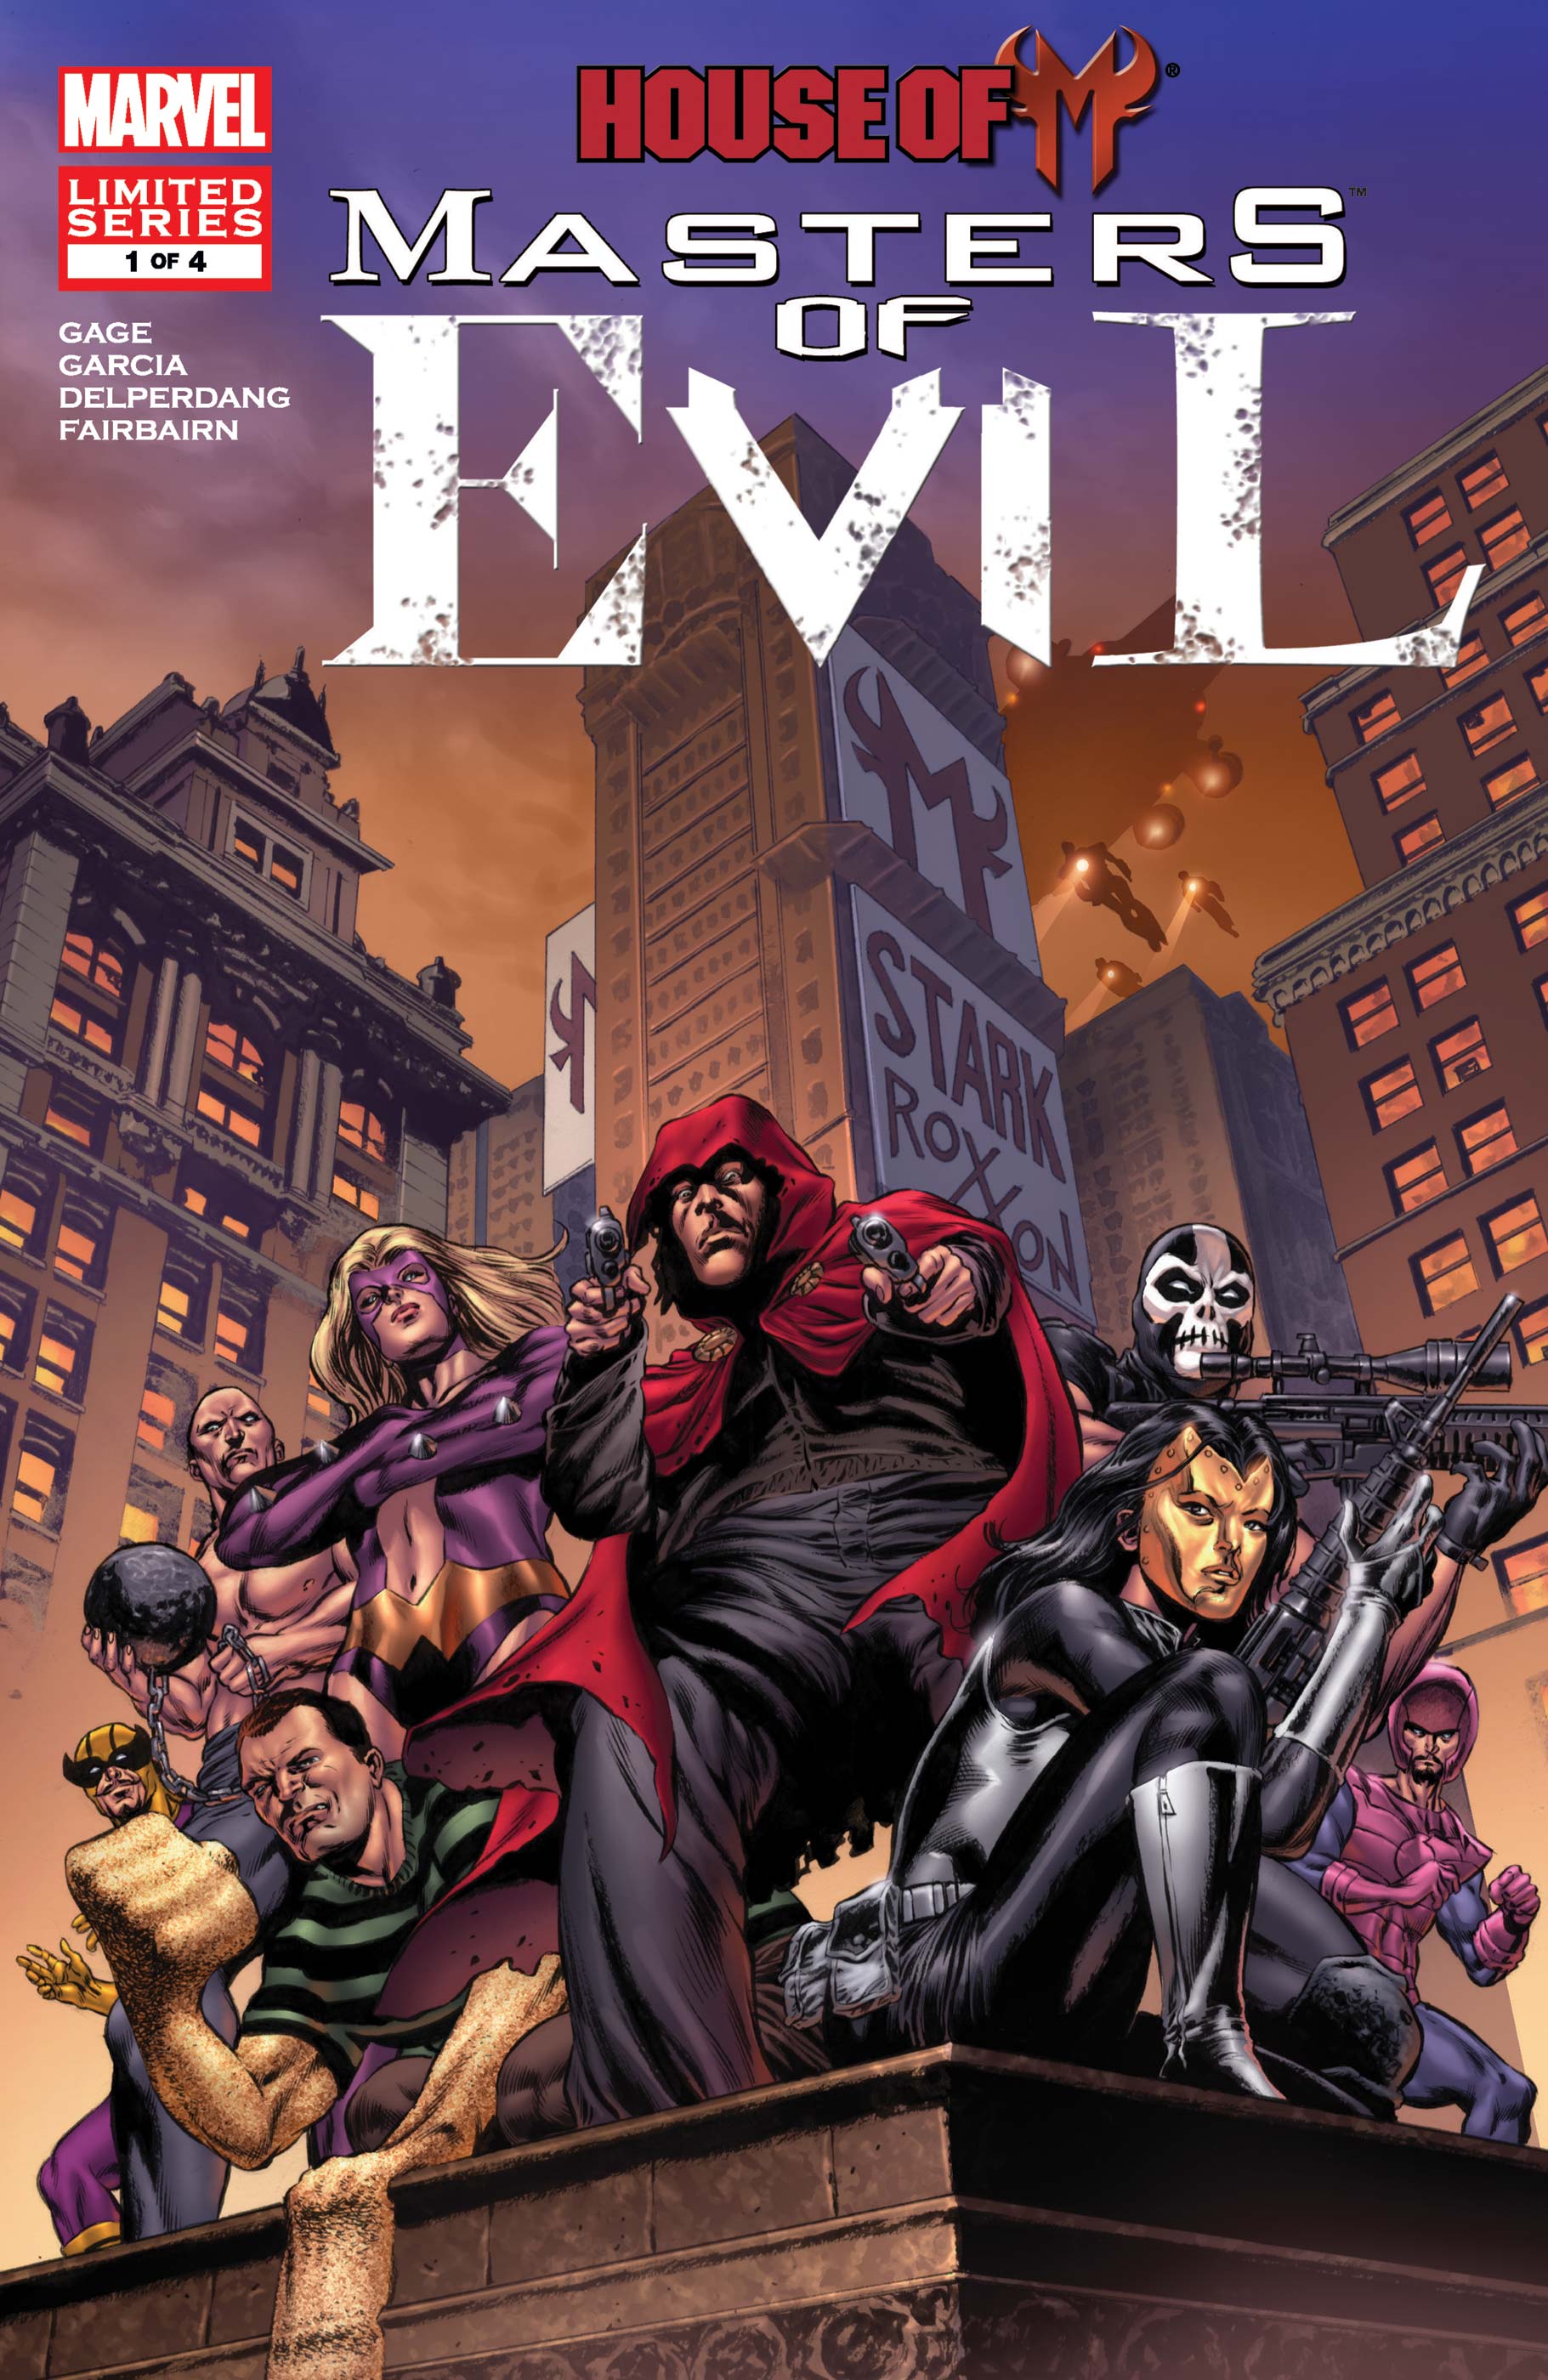 House of m masters of evil